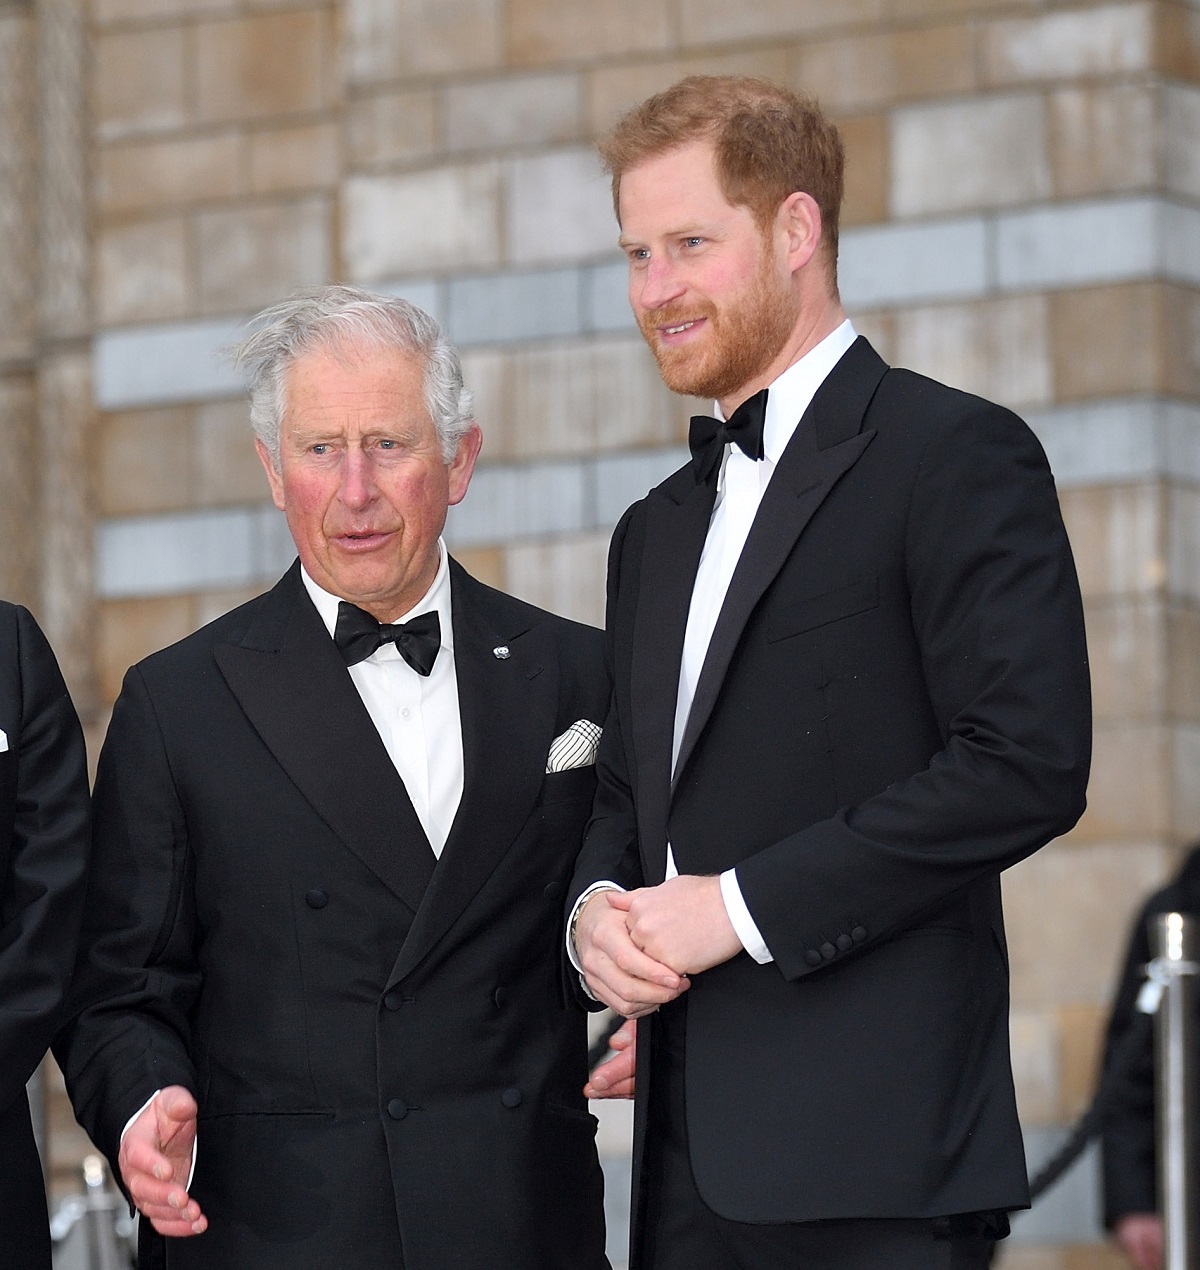 Prince Charles and Prince Harry dressed in tuxedos at the 'Our Planet' premiere